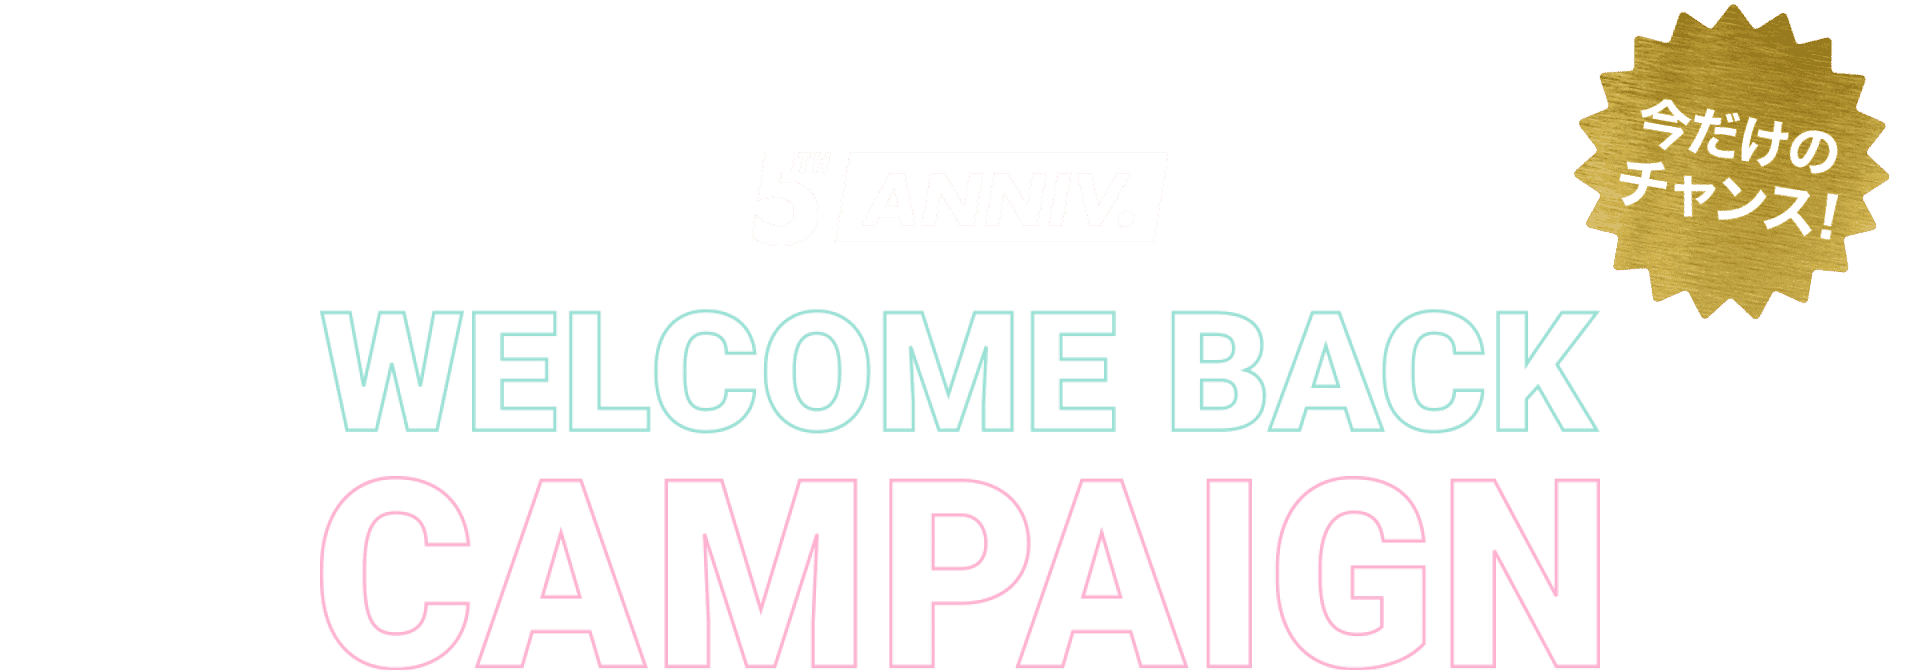 5TH ANNIVERSARY WELCOME BACK CAMPAIGN 今だけのチャンス！8月31日まで